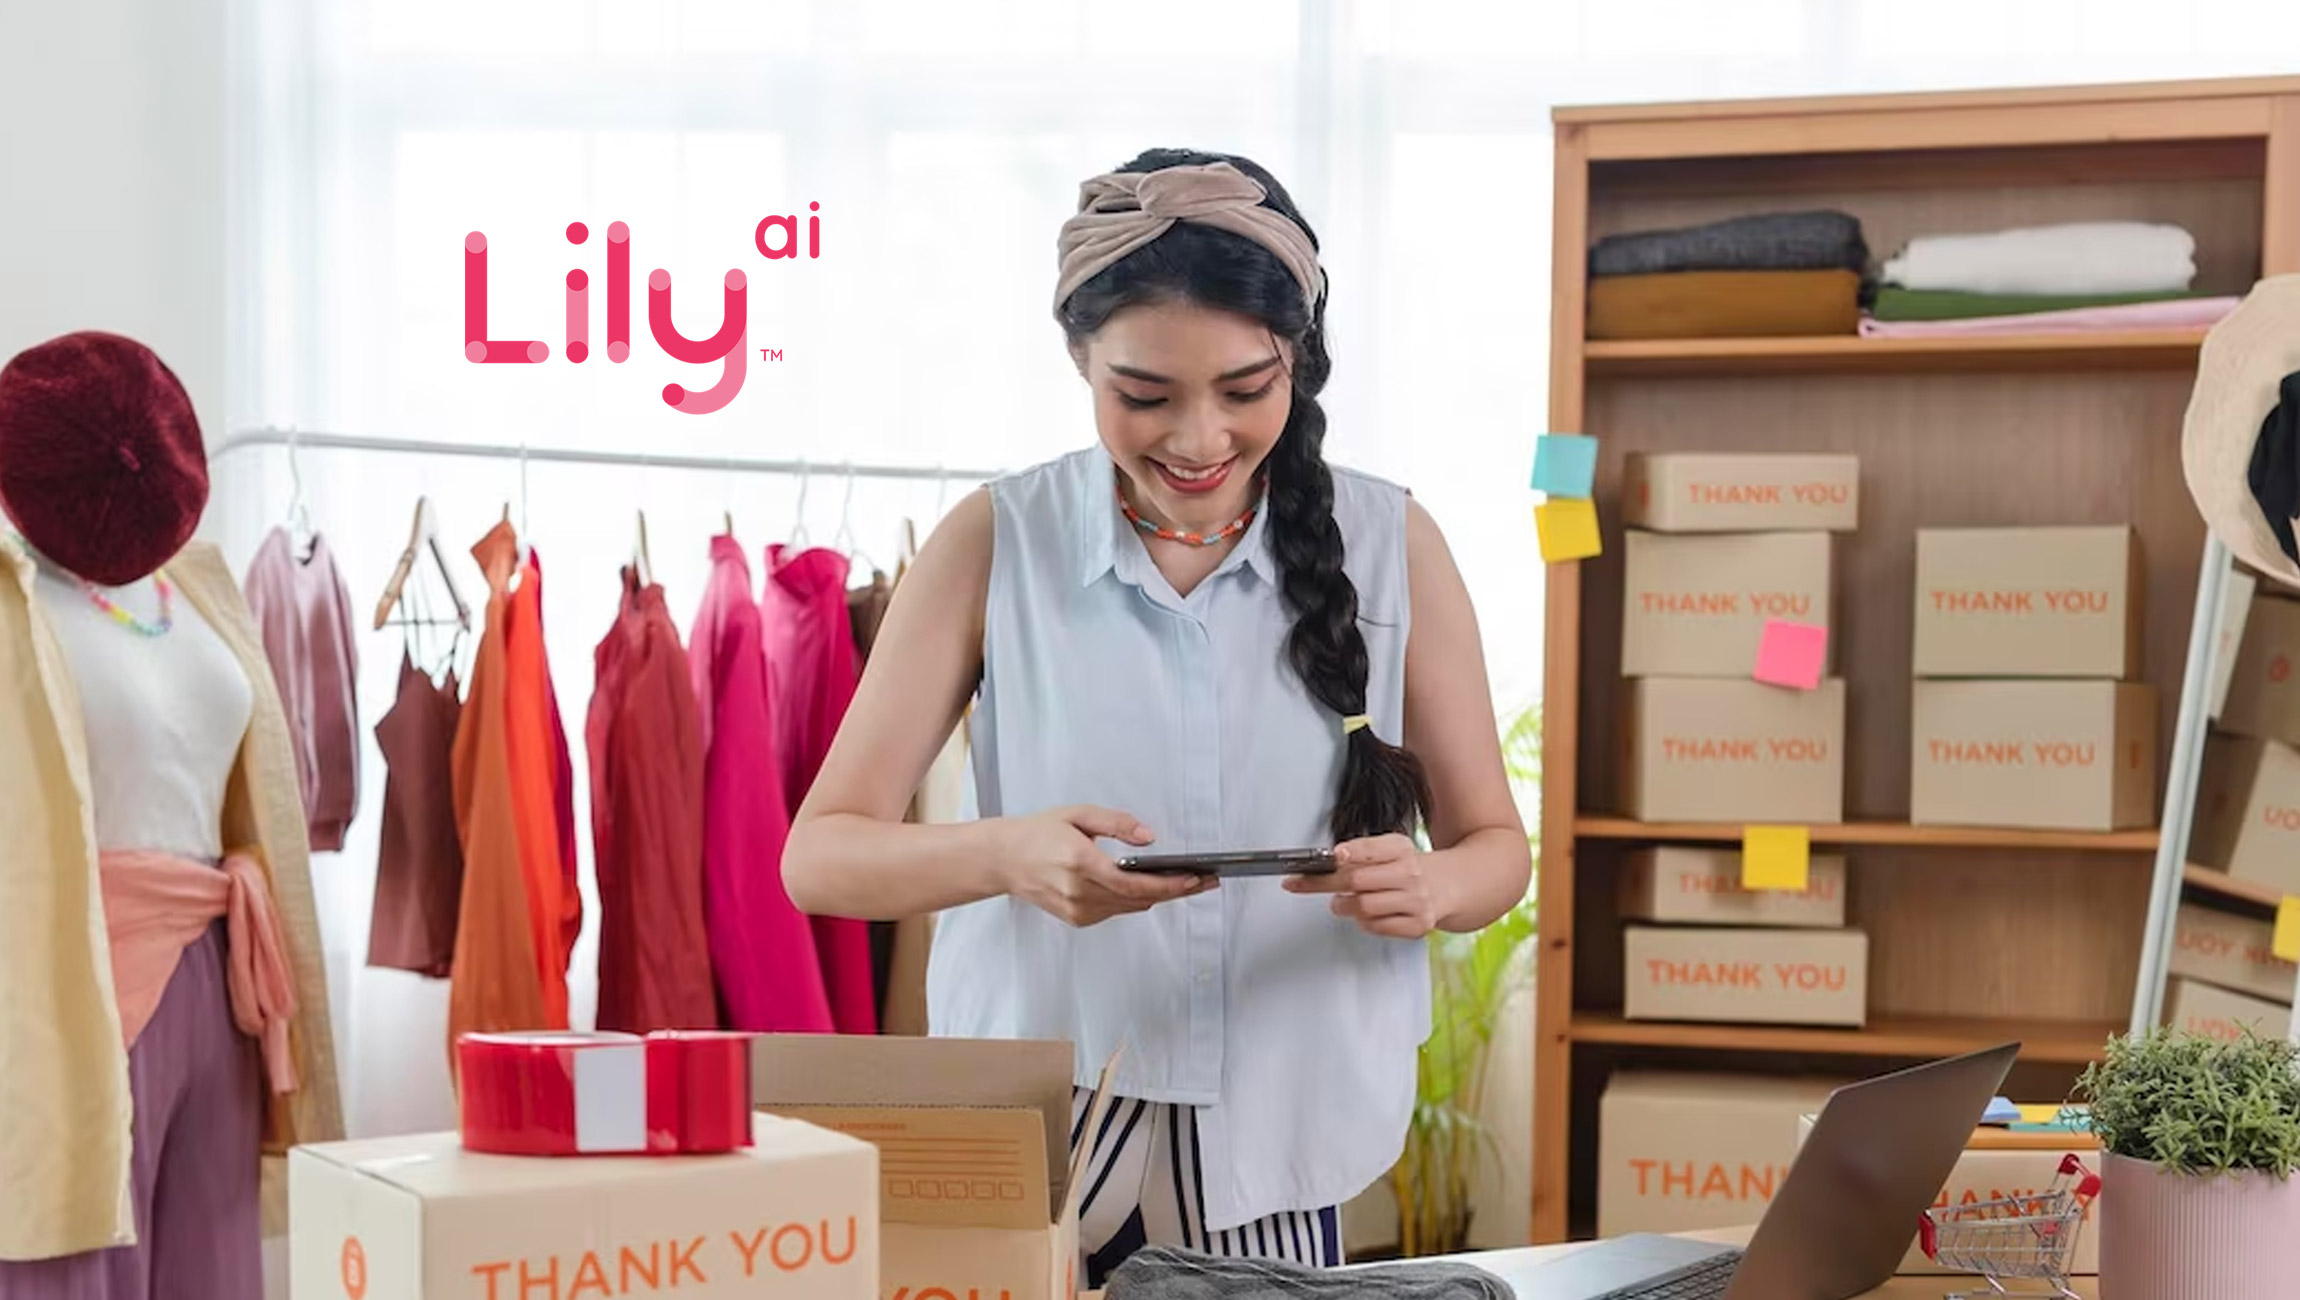 Lily AI Launches Customer-Centric Content Generation to Improve Product Discovery and Drive Sales